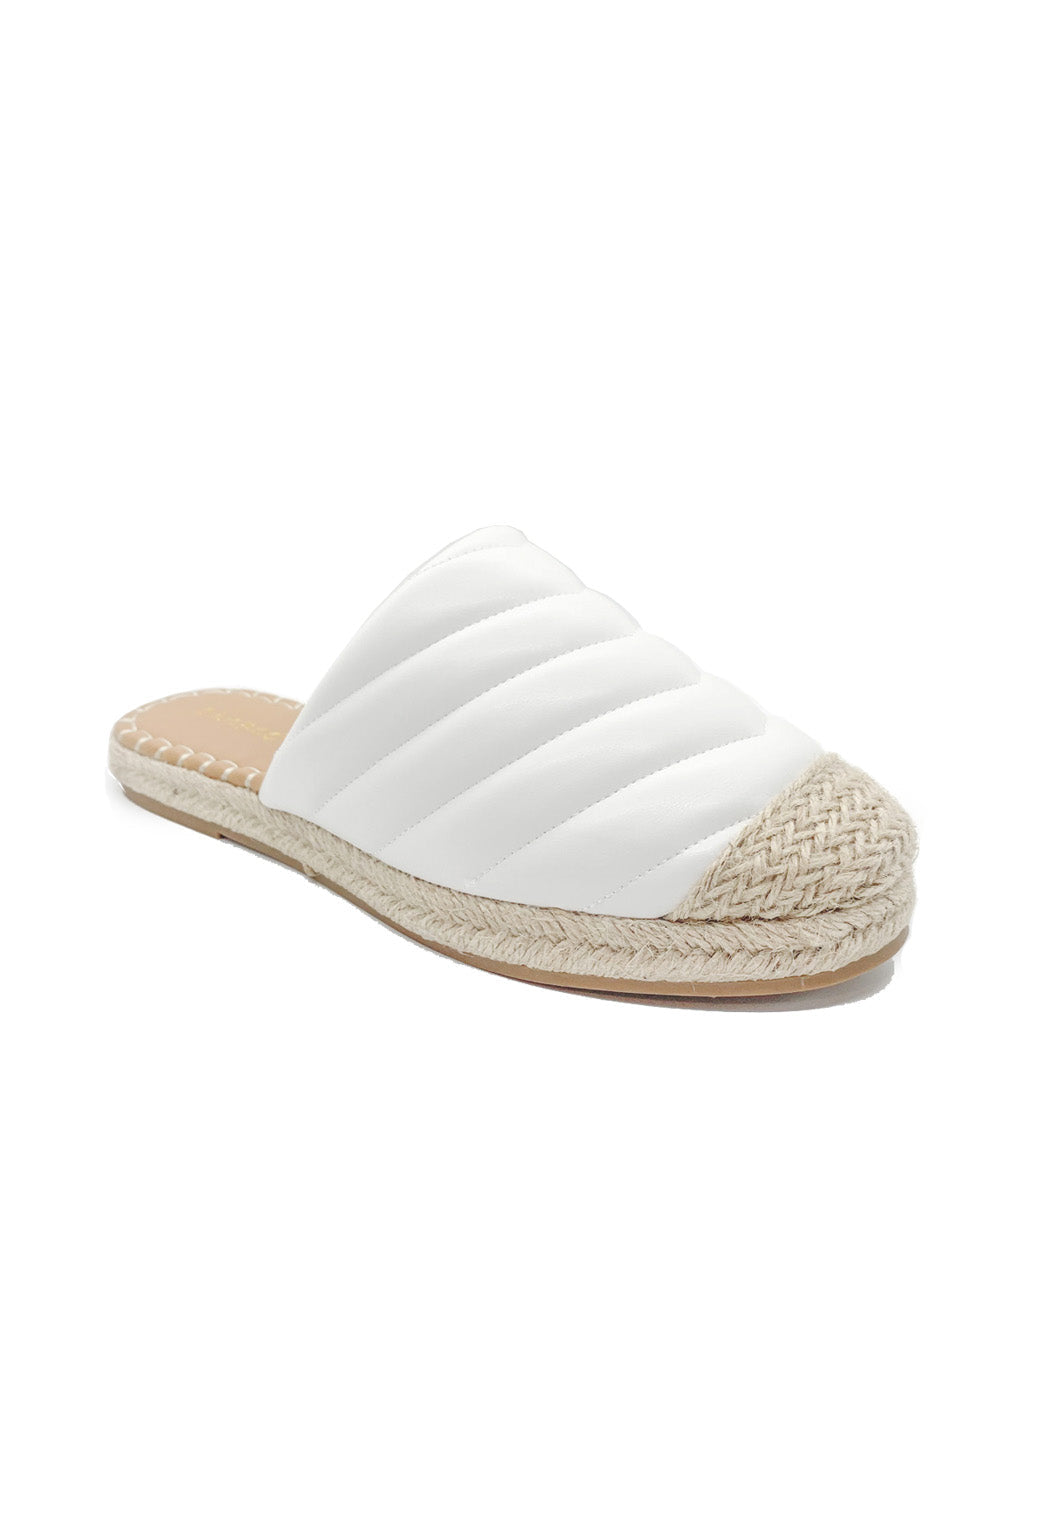 Quilted Espadrilles - White - Final Sale